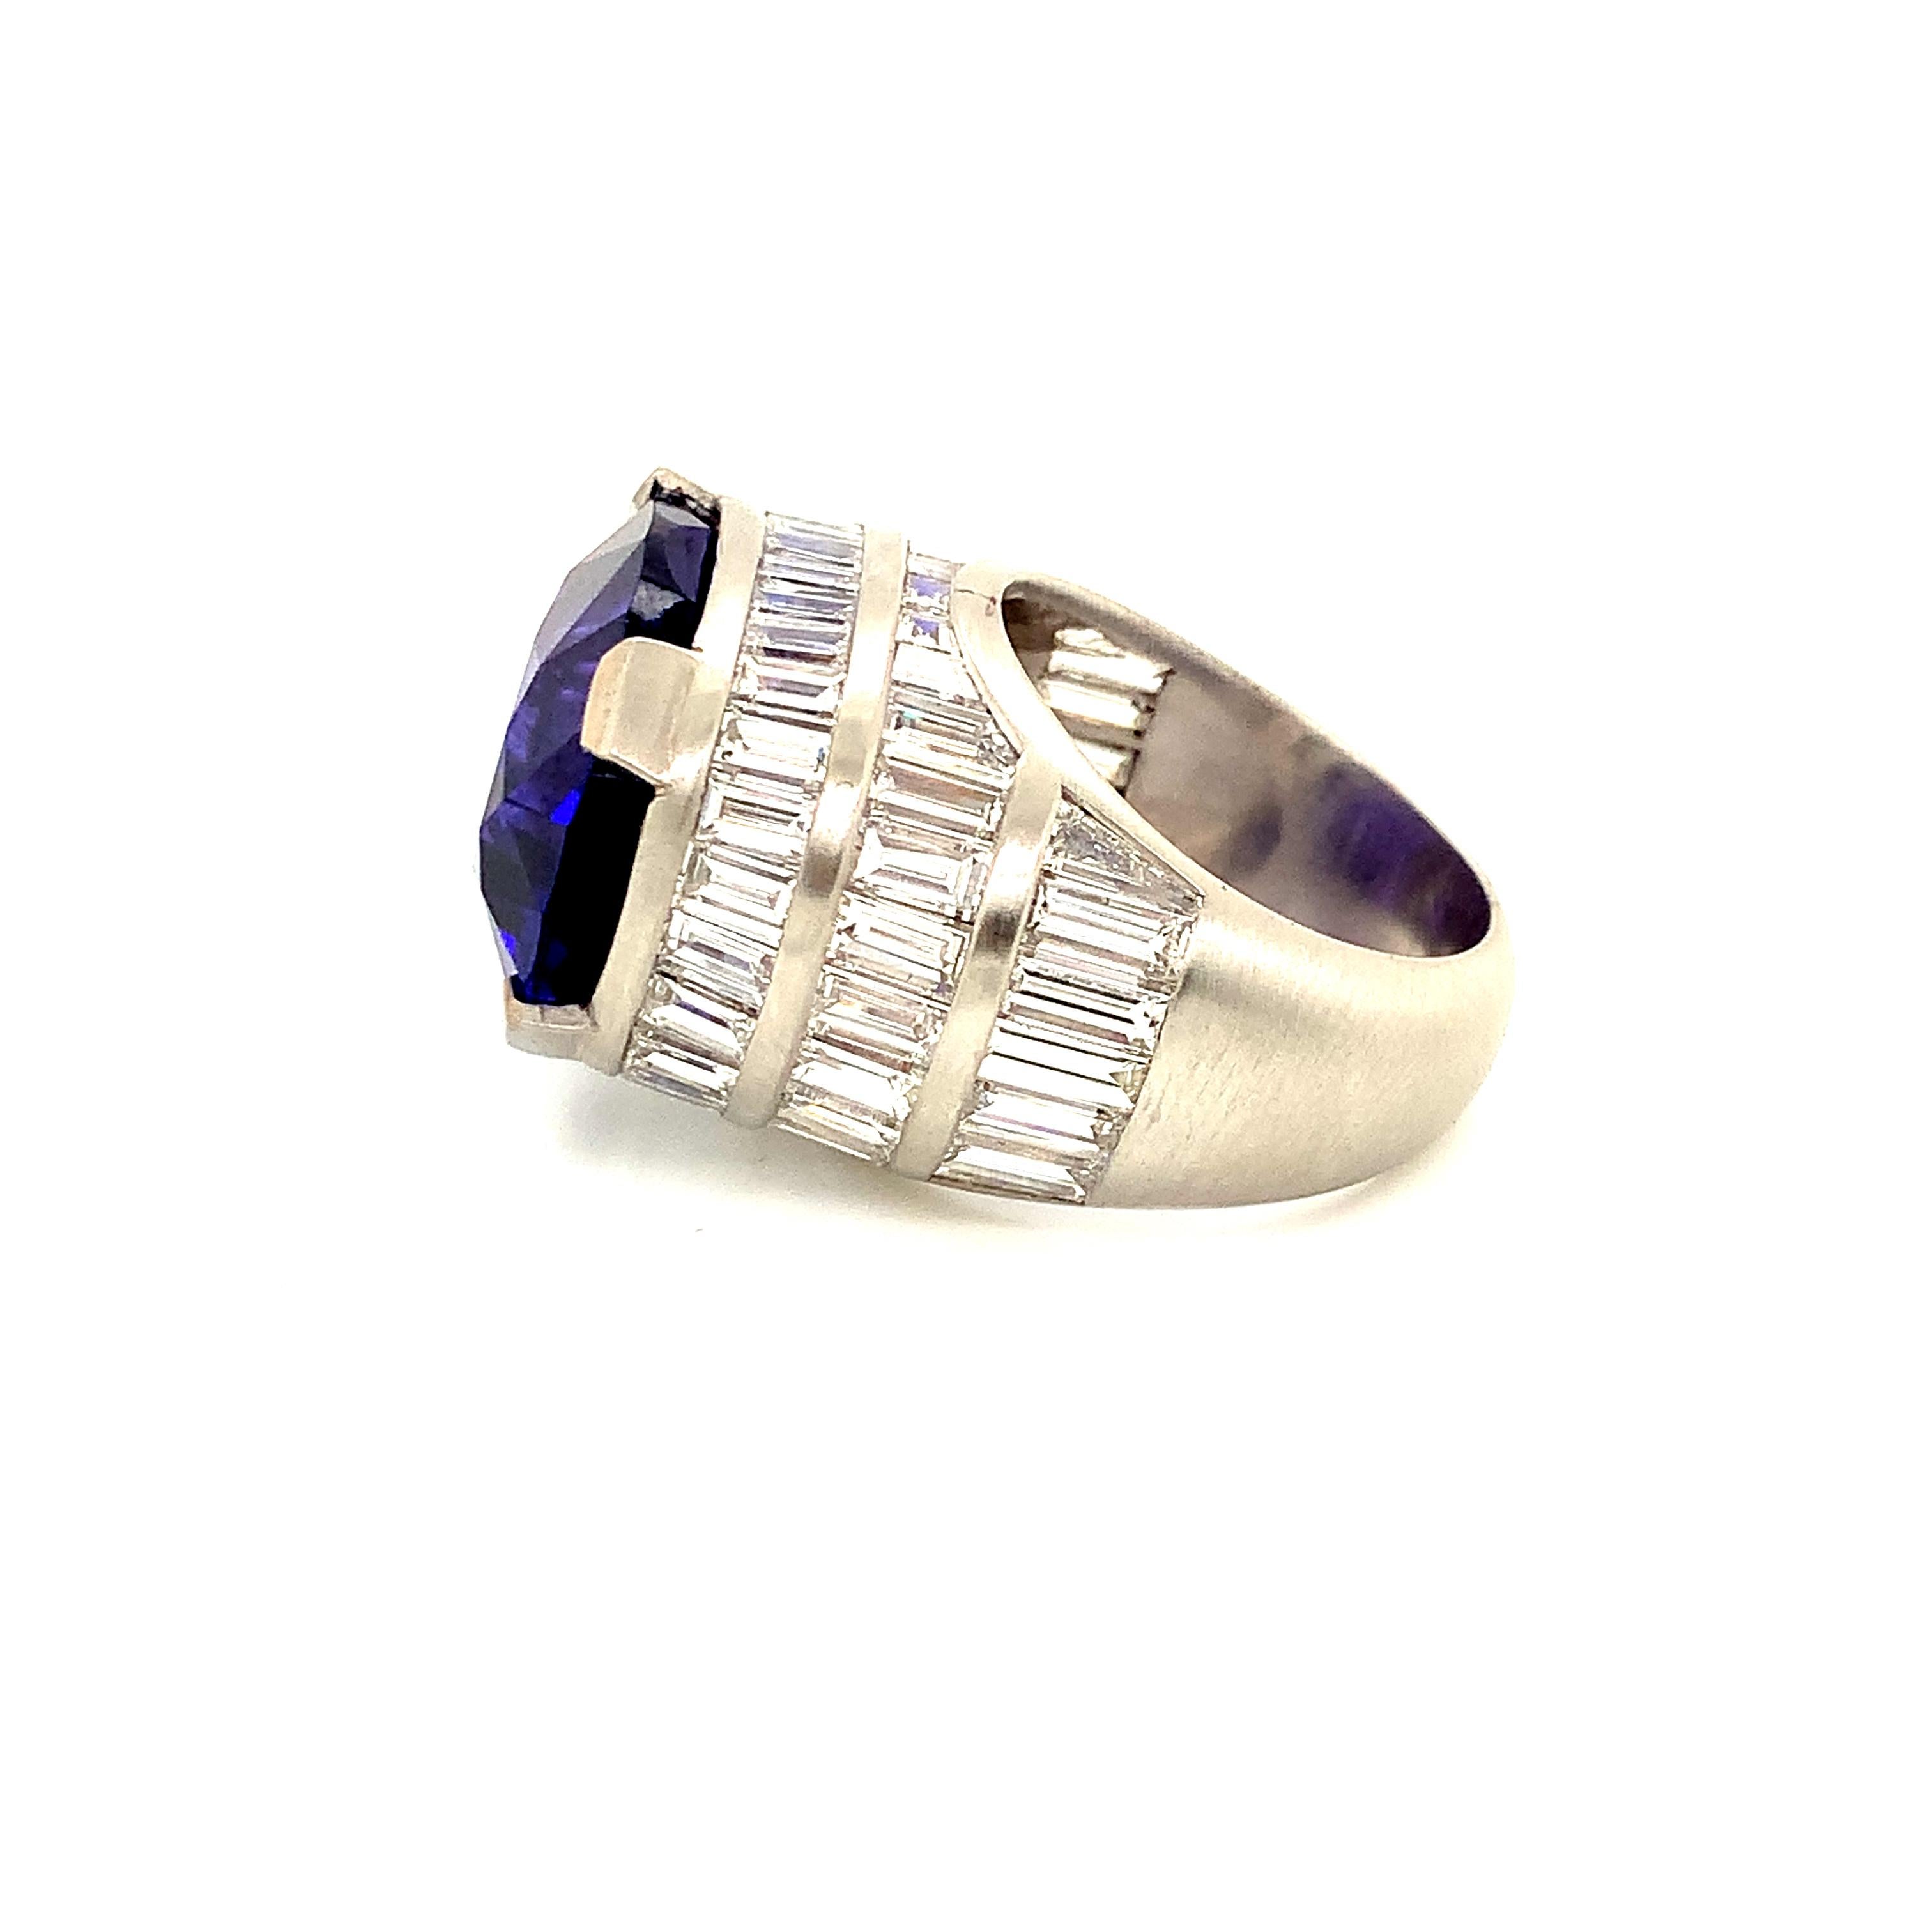 Impressive ring with a 30.30 Cts tanzanite oval shape mounted on a CIRIO Ring in Platinium.
Platinium 24 gr
Diamonds baguette cut 10.31 Cts 
Size 55 

This stunning Tanzanite ring is a real eye-catcher and is perfect to be worn on any occasion,